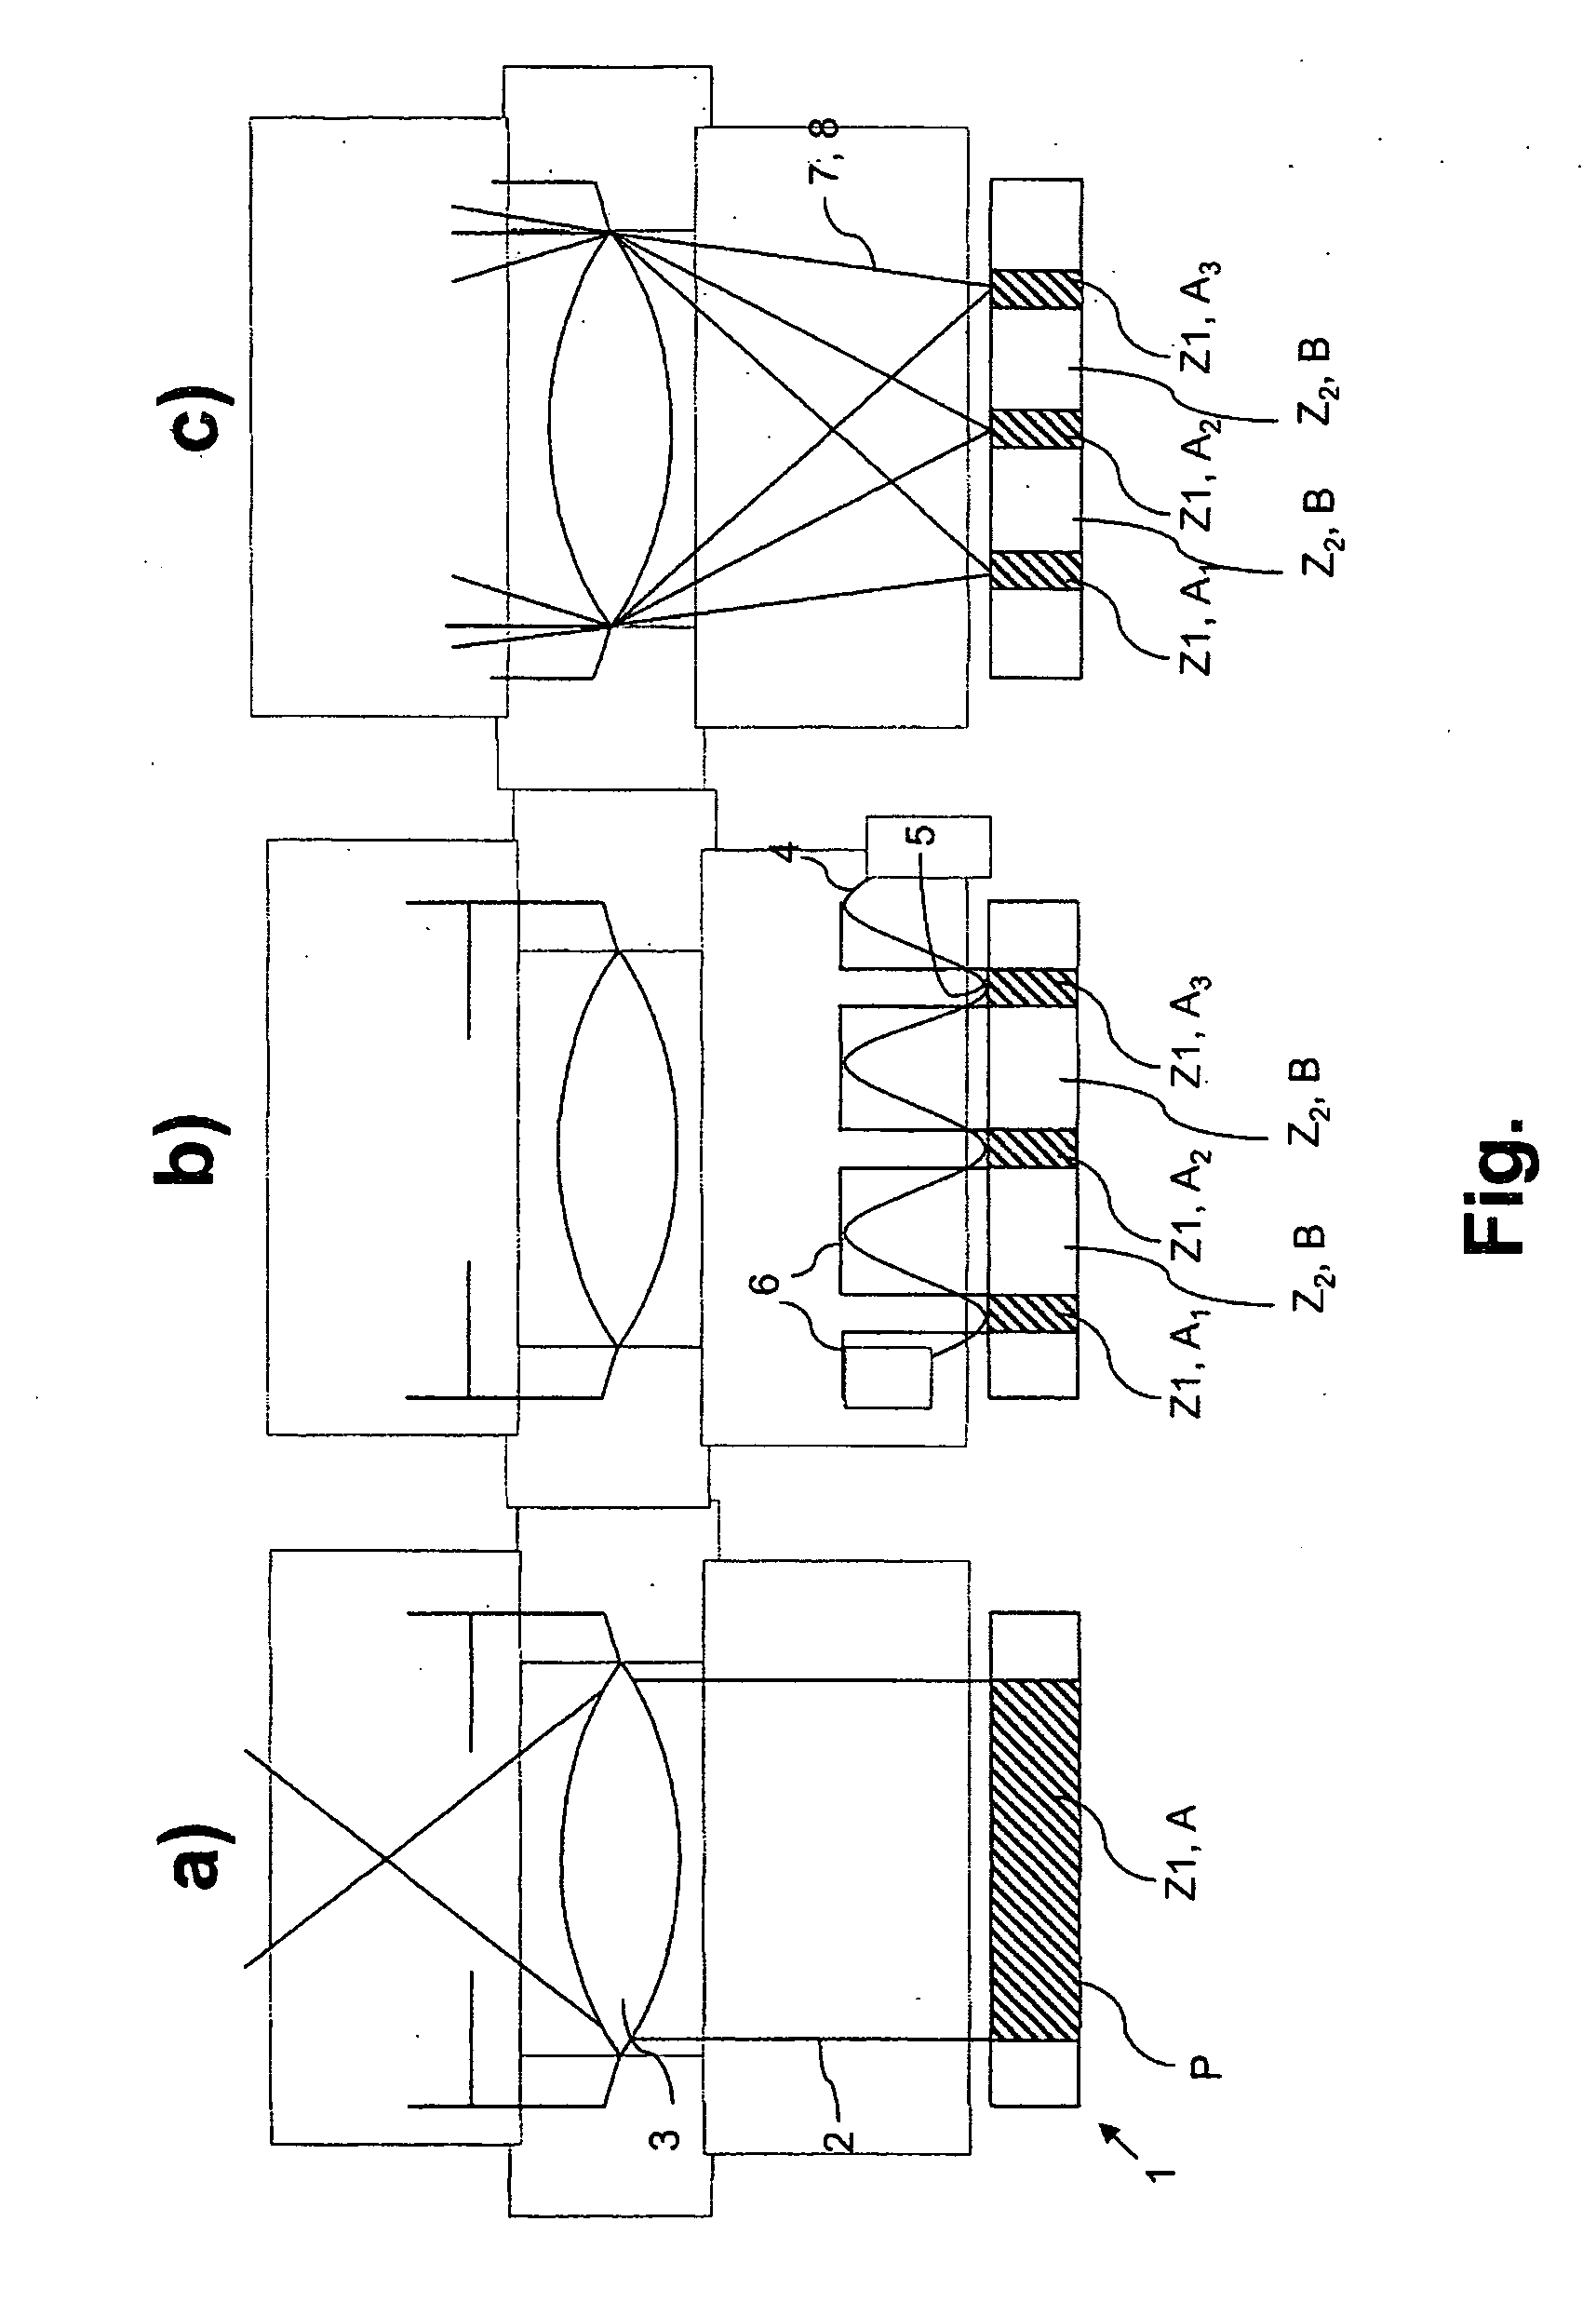 Method for high spatial resolution examination of samples